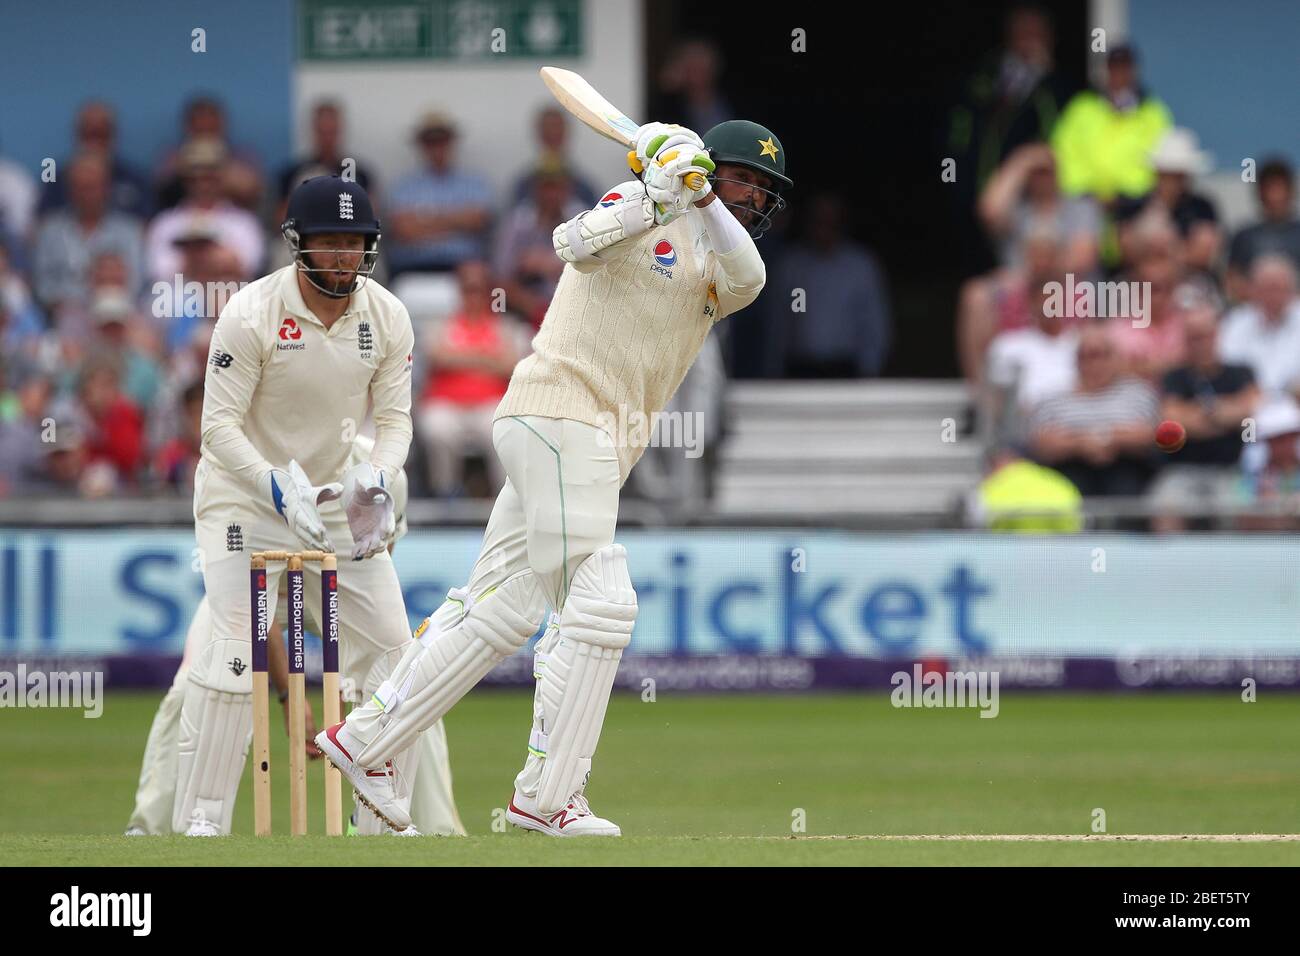 LEEDS, UK - JUNE 3rd Mohammed Amir of Pakistan batting  during the third day of the Second Nat West Test match between England and Pakistan at Headingley Cricket Ground, Leeds on Sunday 3rd June 2018. (Credit: Mark Fletcher | MI News) Stock Photo